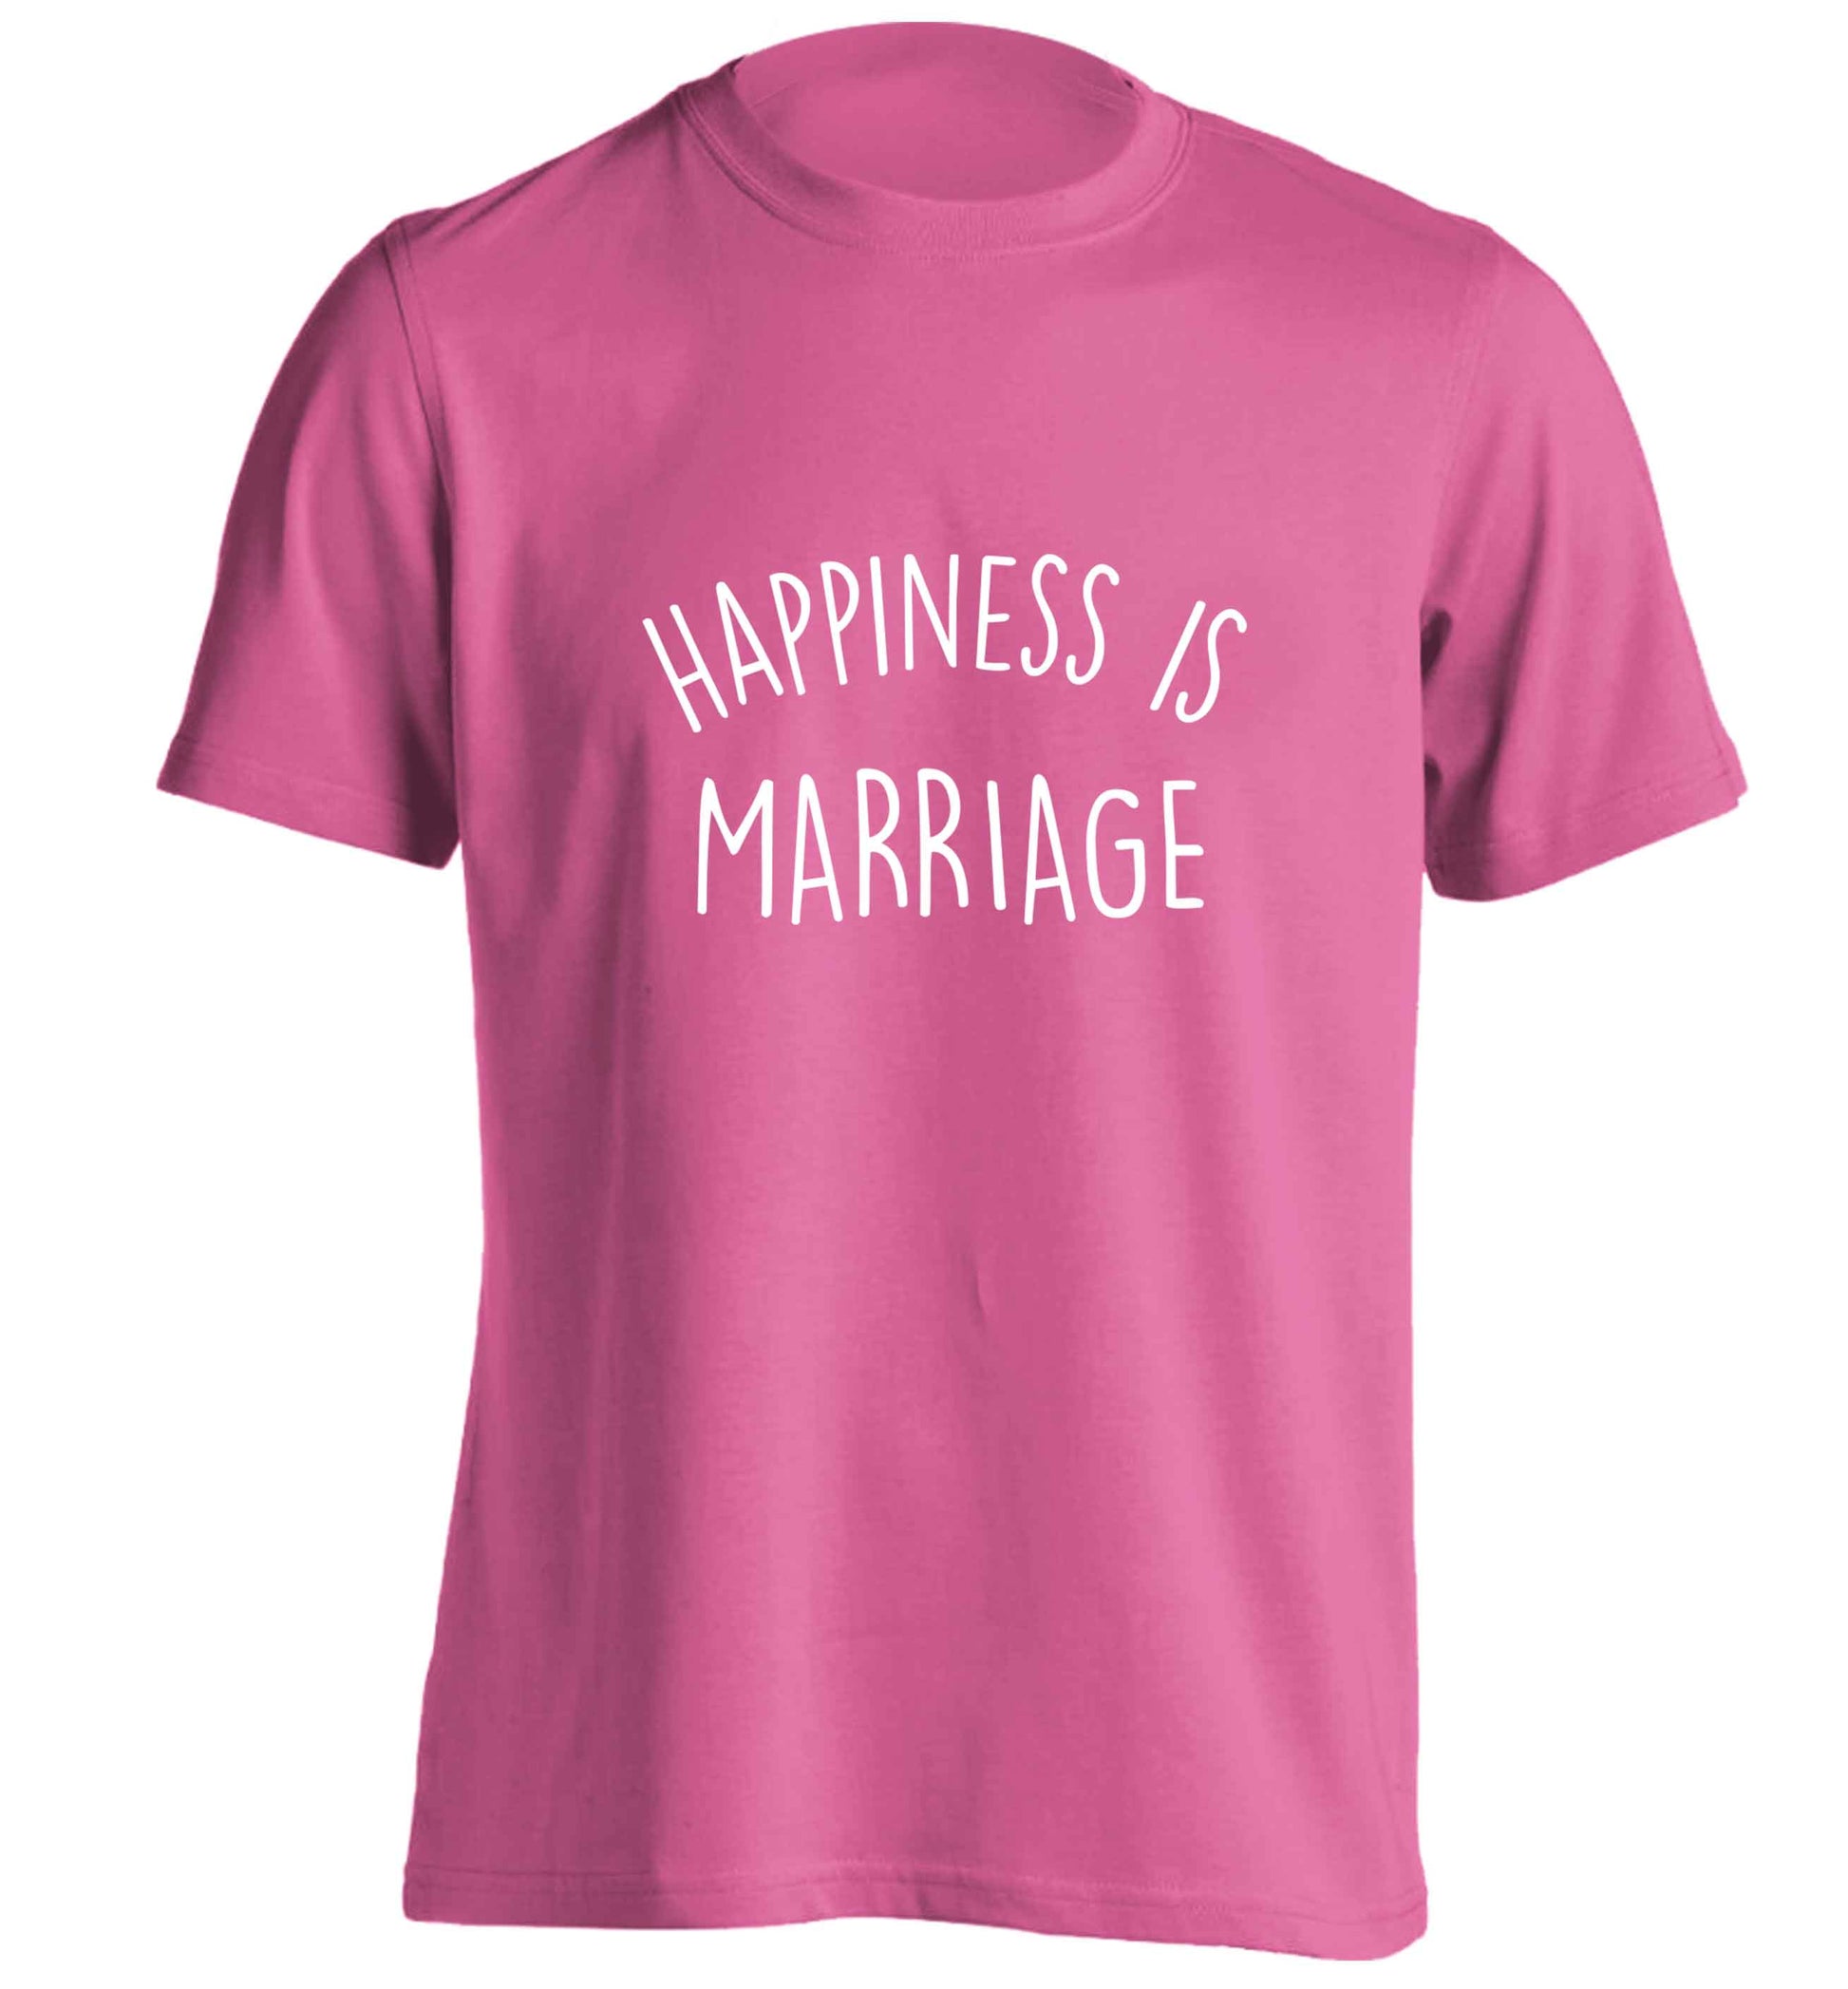 Happiness is wedding planning adults unisex pink Tshirt 2XL